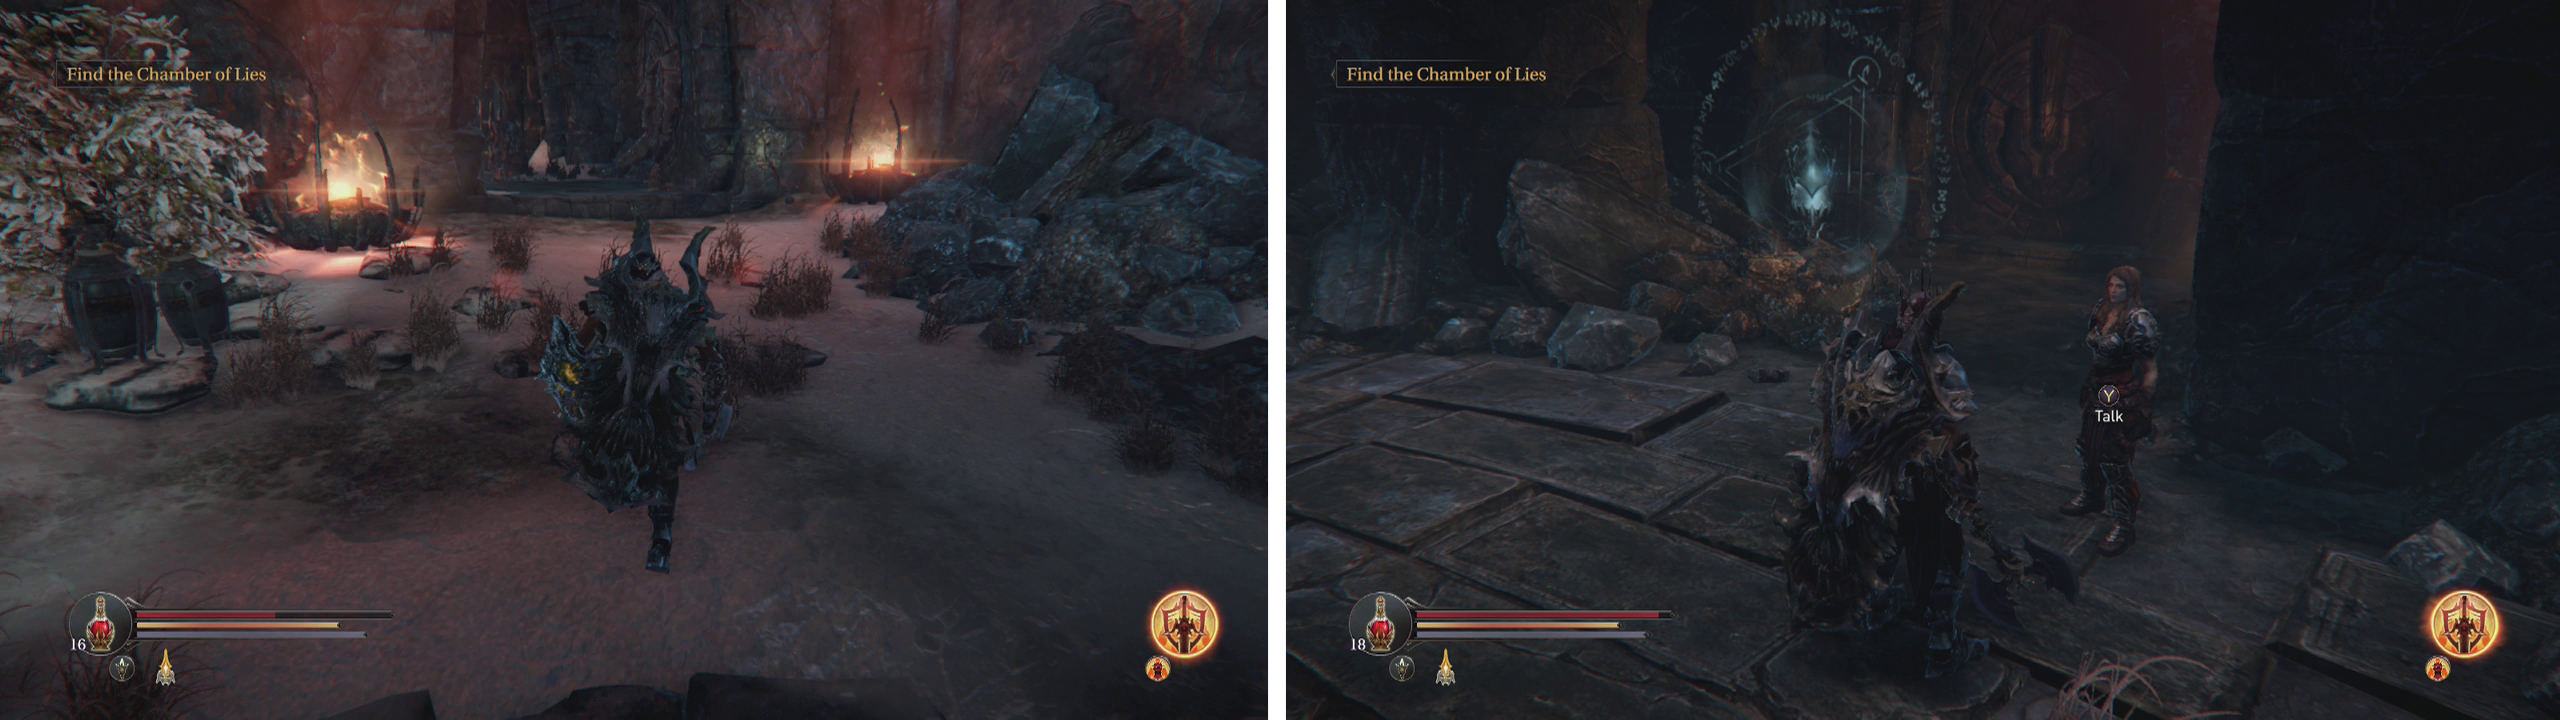 Re-enter the Rhogar Temple (left) and head for the Infiltrators area to find Yetka (right).